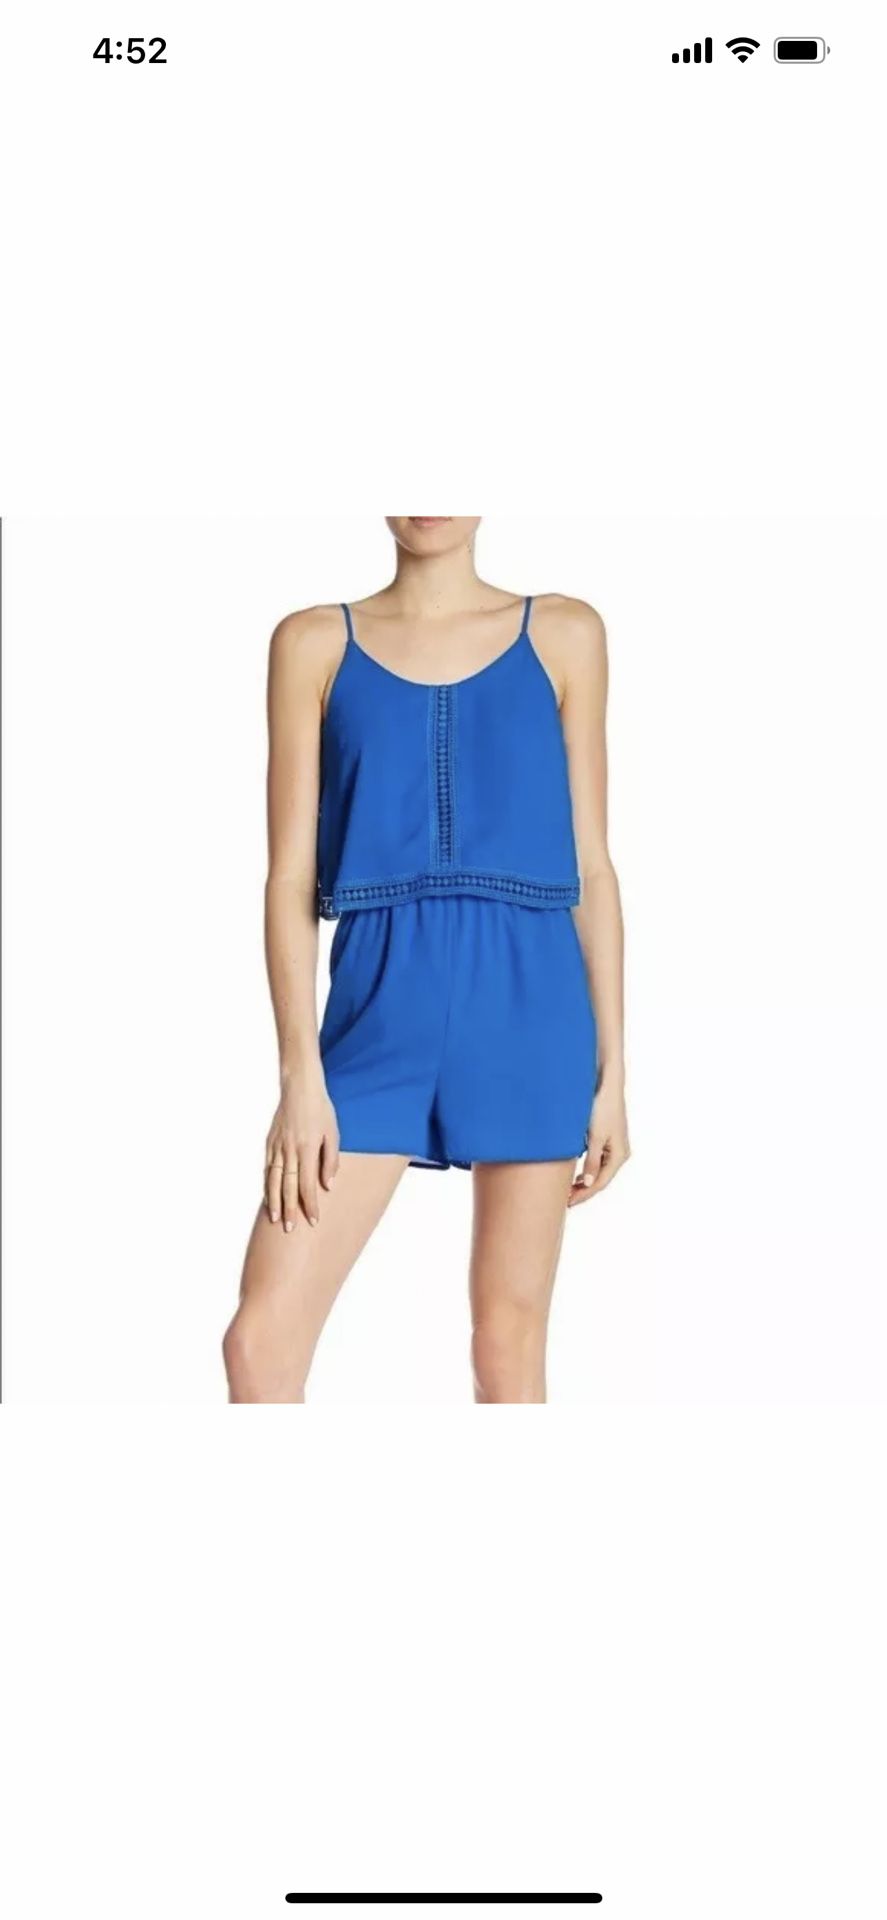 19 Cooper Romper Size Medium , Royal Blue , Embroidered , With adjustable shoulder straps ,New Whit Tags Original 